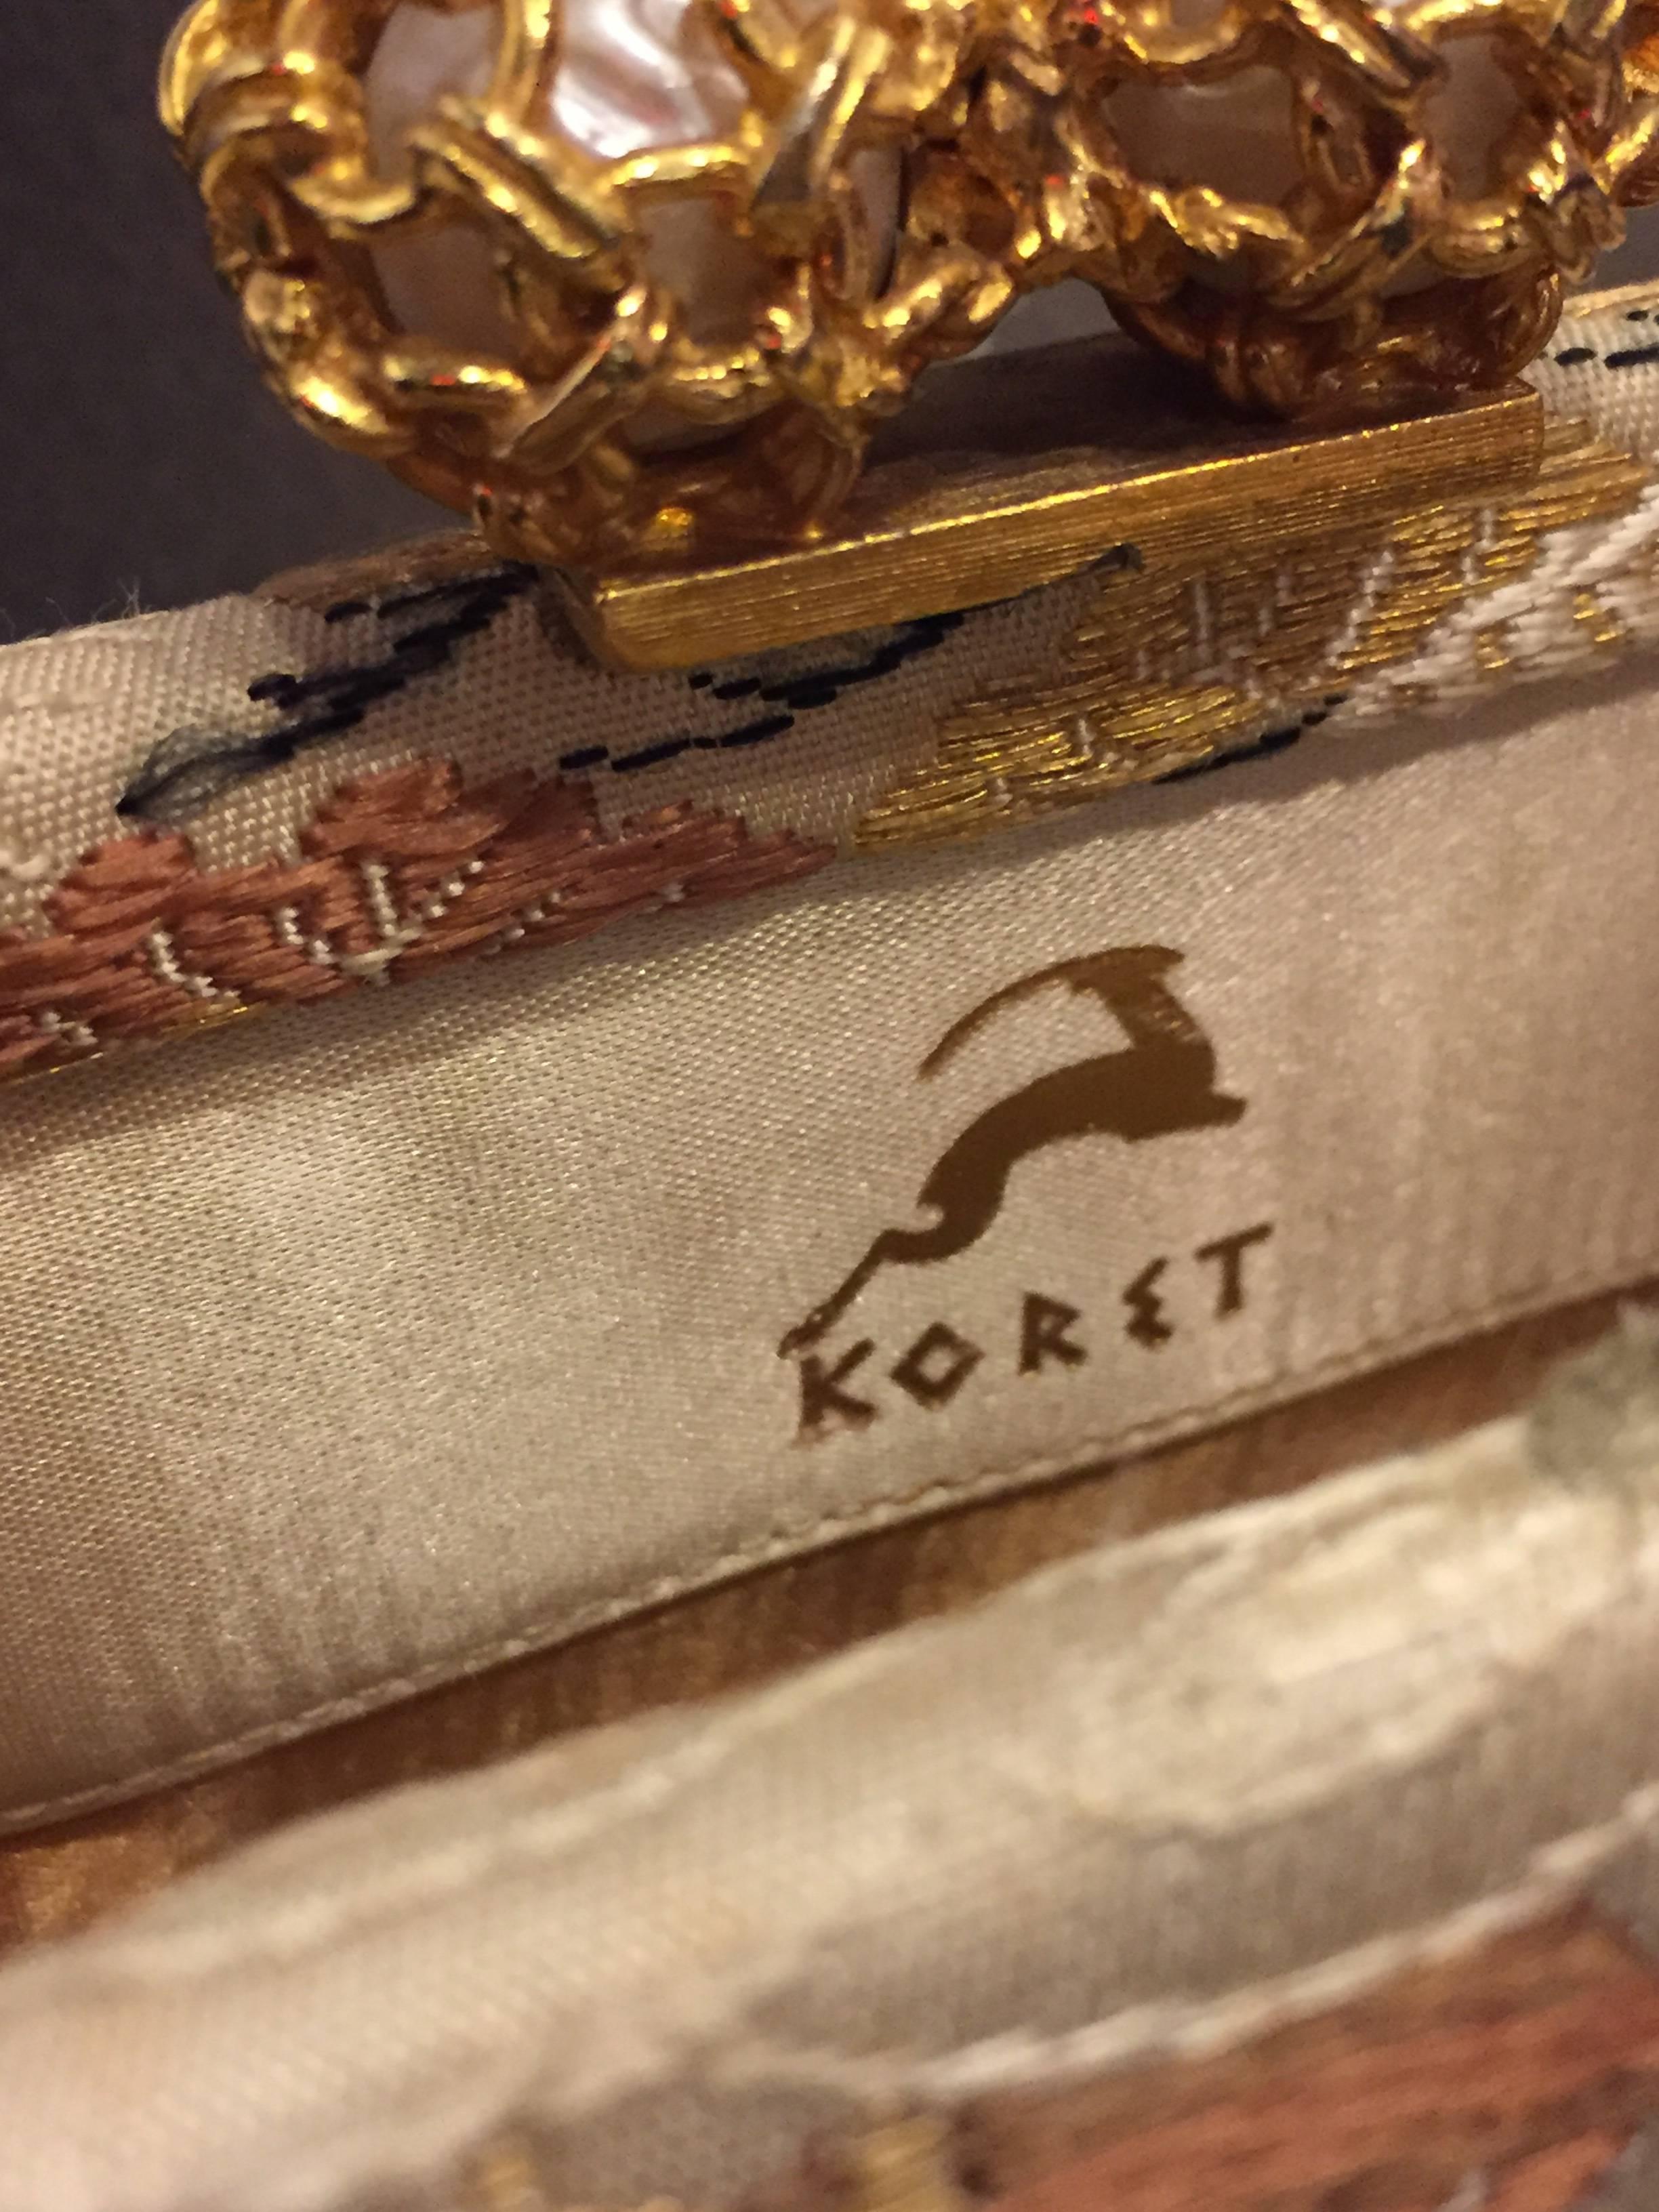 Women's 1950s Koret Asian Brocade Clutch Evening Bag with Gold and Pearl Clasp